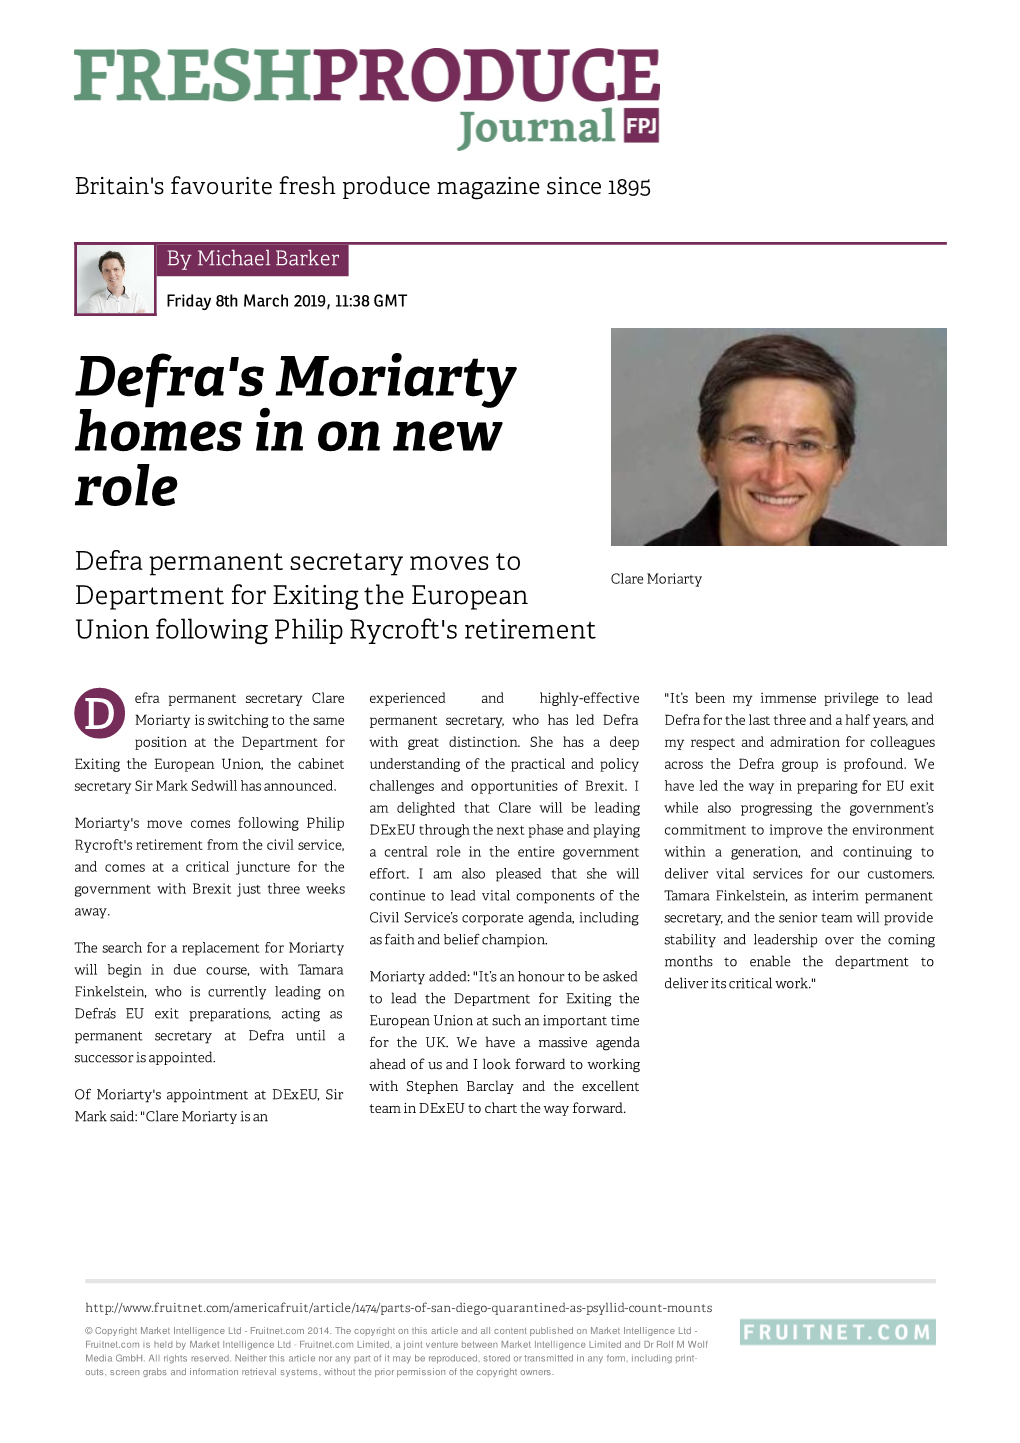 Defra's Moriarty Homes in on New Role